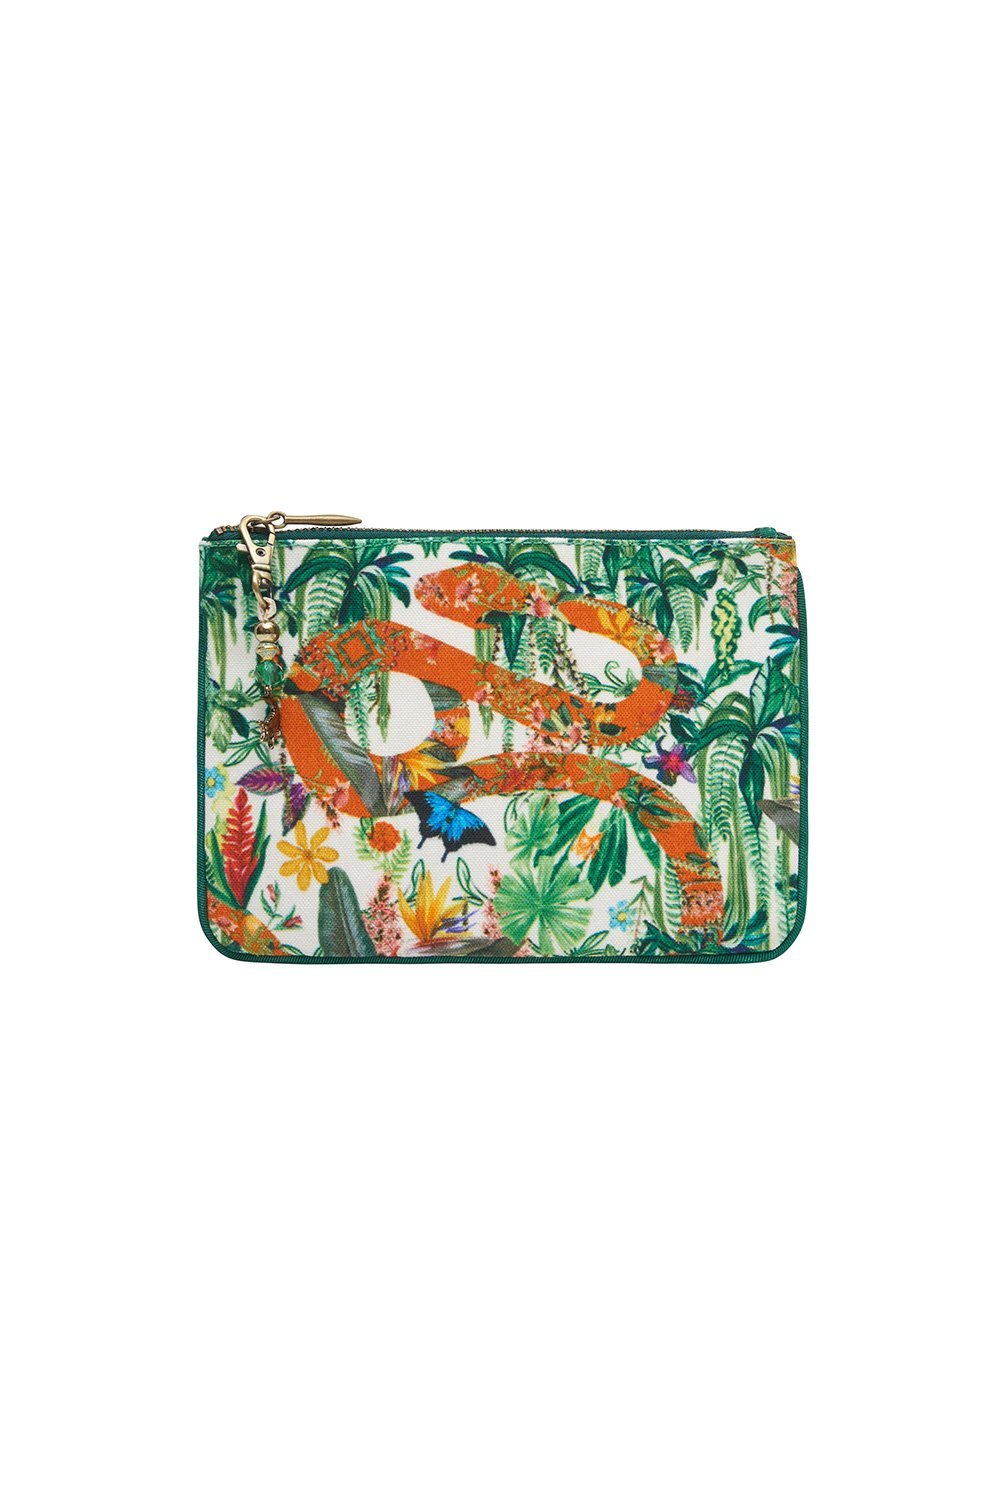 COIN AND PHONE PURSE DAINTREE DARLING